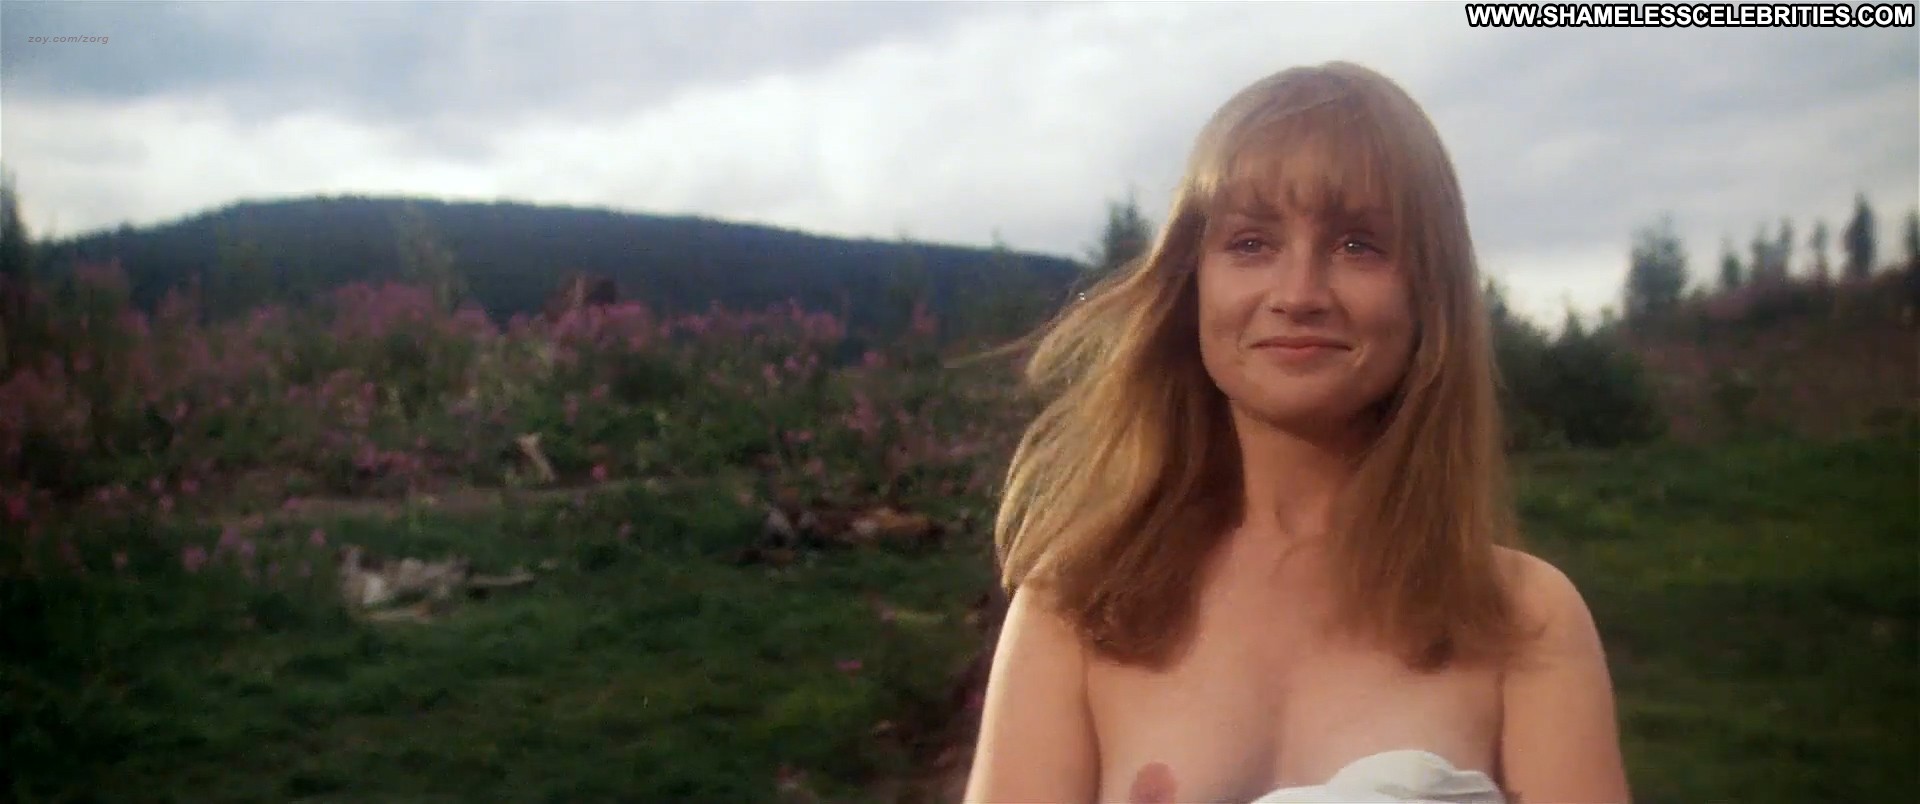 Isabelle huppert nude full frontal